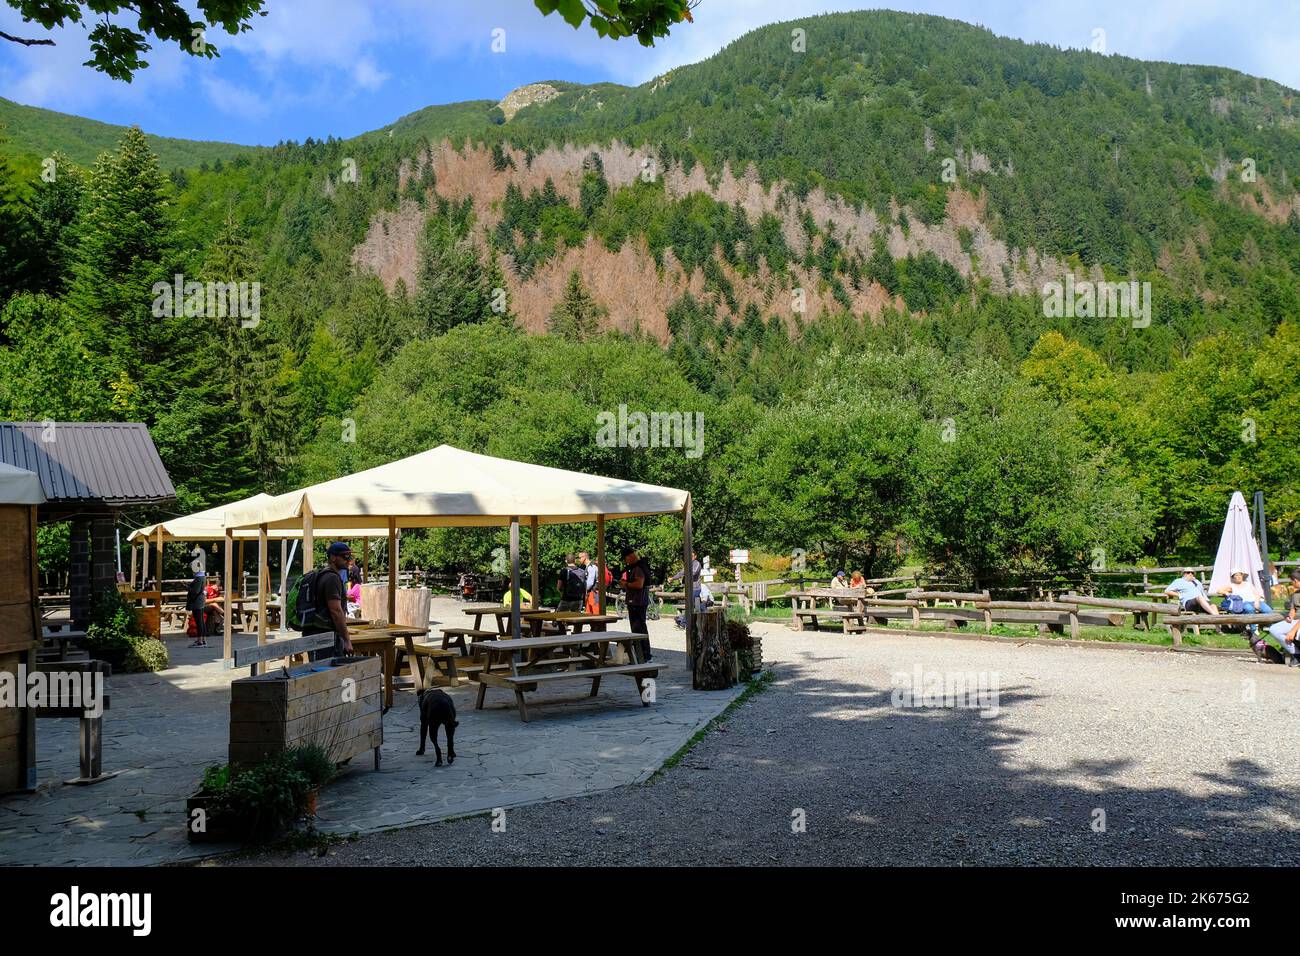 SHELTER IN THE MOUNTAINS WITH TOURISTS. LAGDEI, PARMA Stock Photo